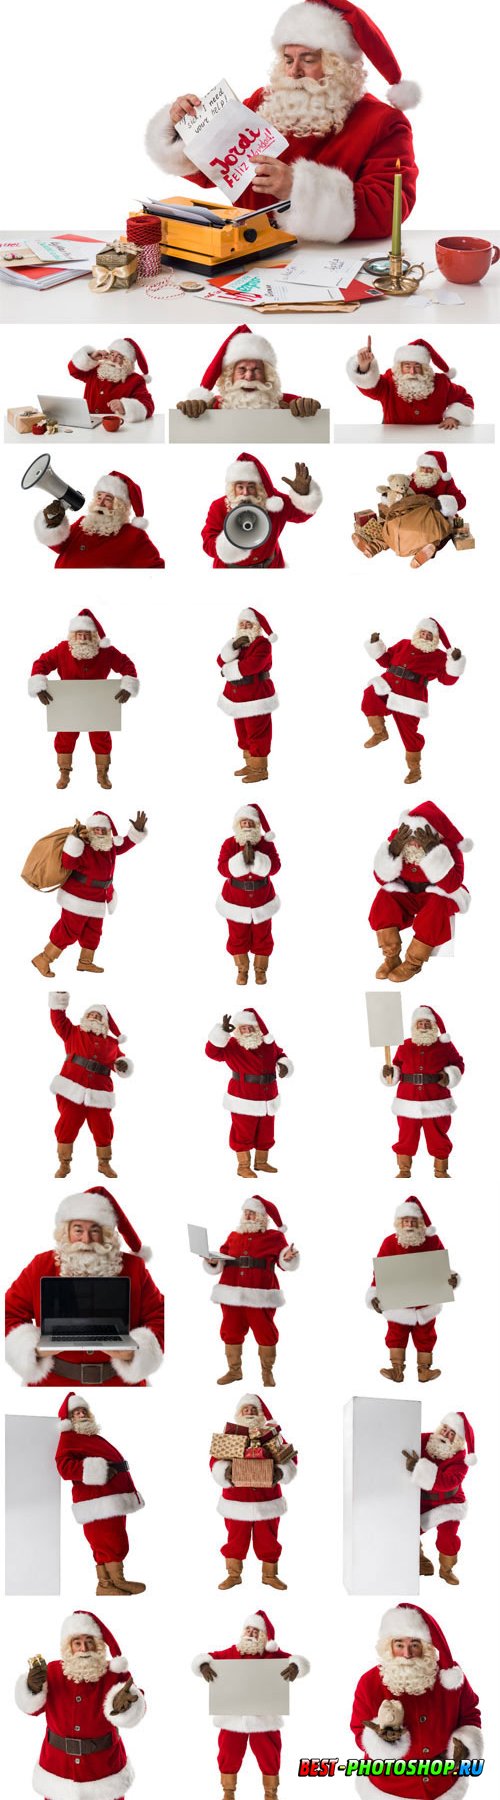 New Year and Christmas stock photos 21